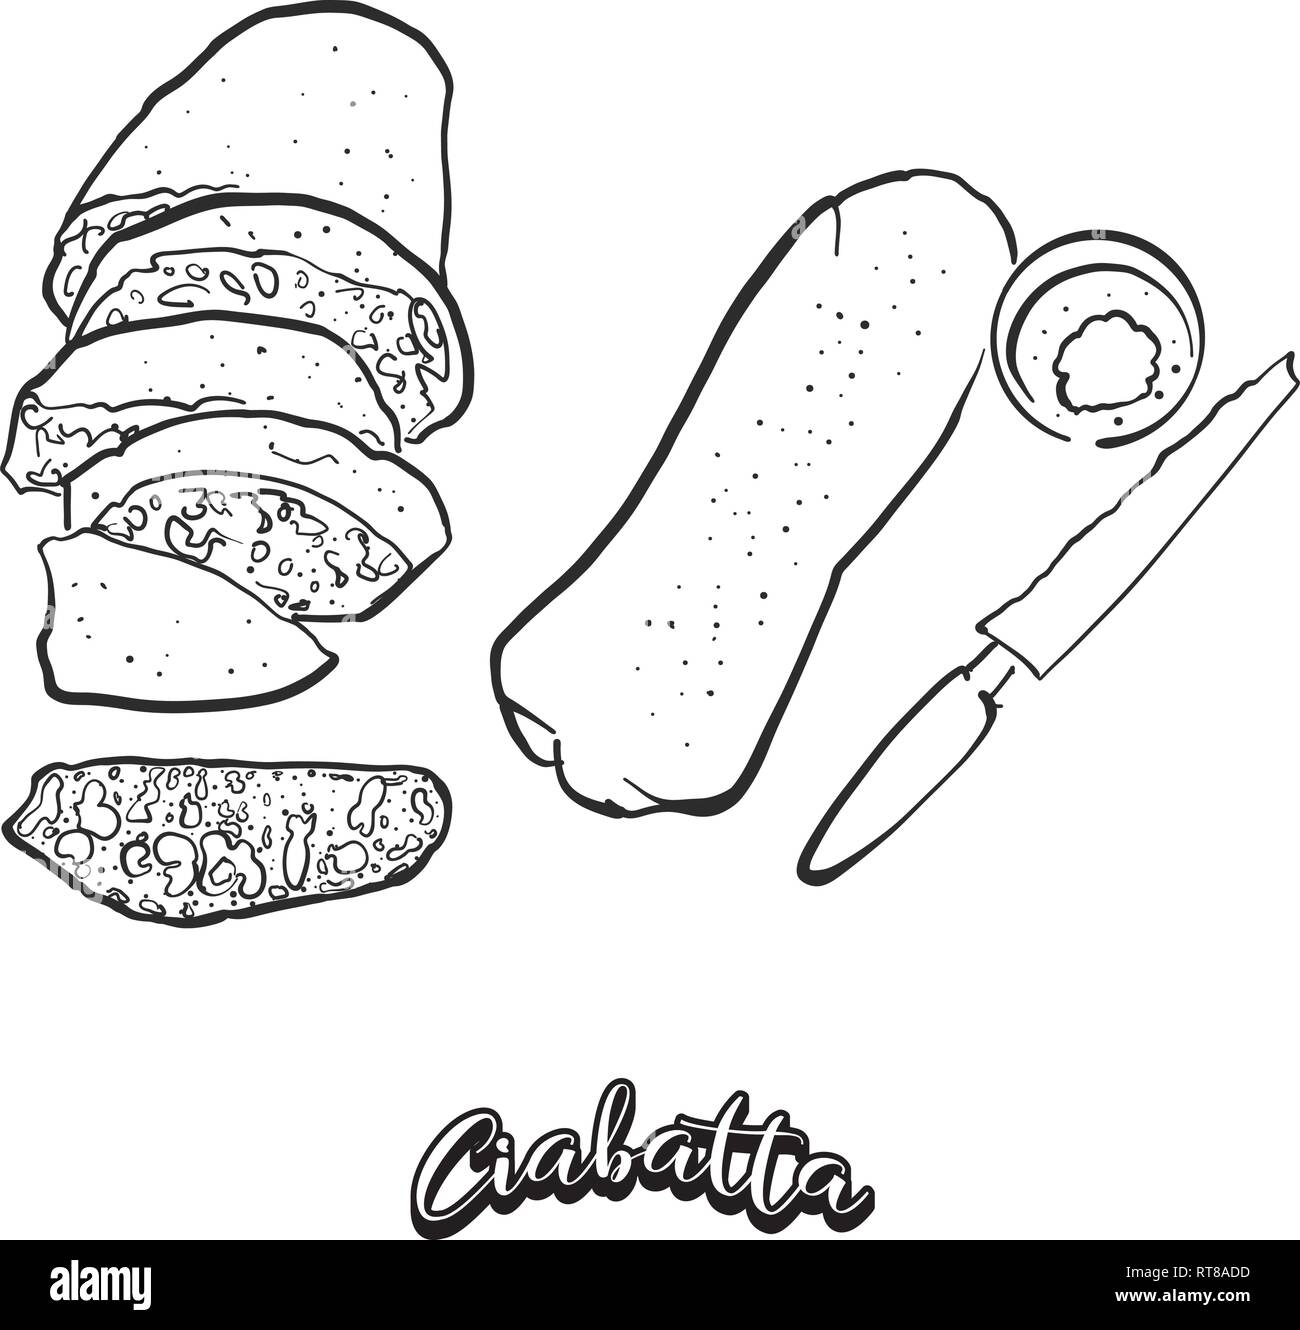 Hand drawn sketch of Ciabatta bread. Vector drawing of White food, usually known in Italy. Bread illustration series. Stock Vector